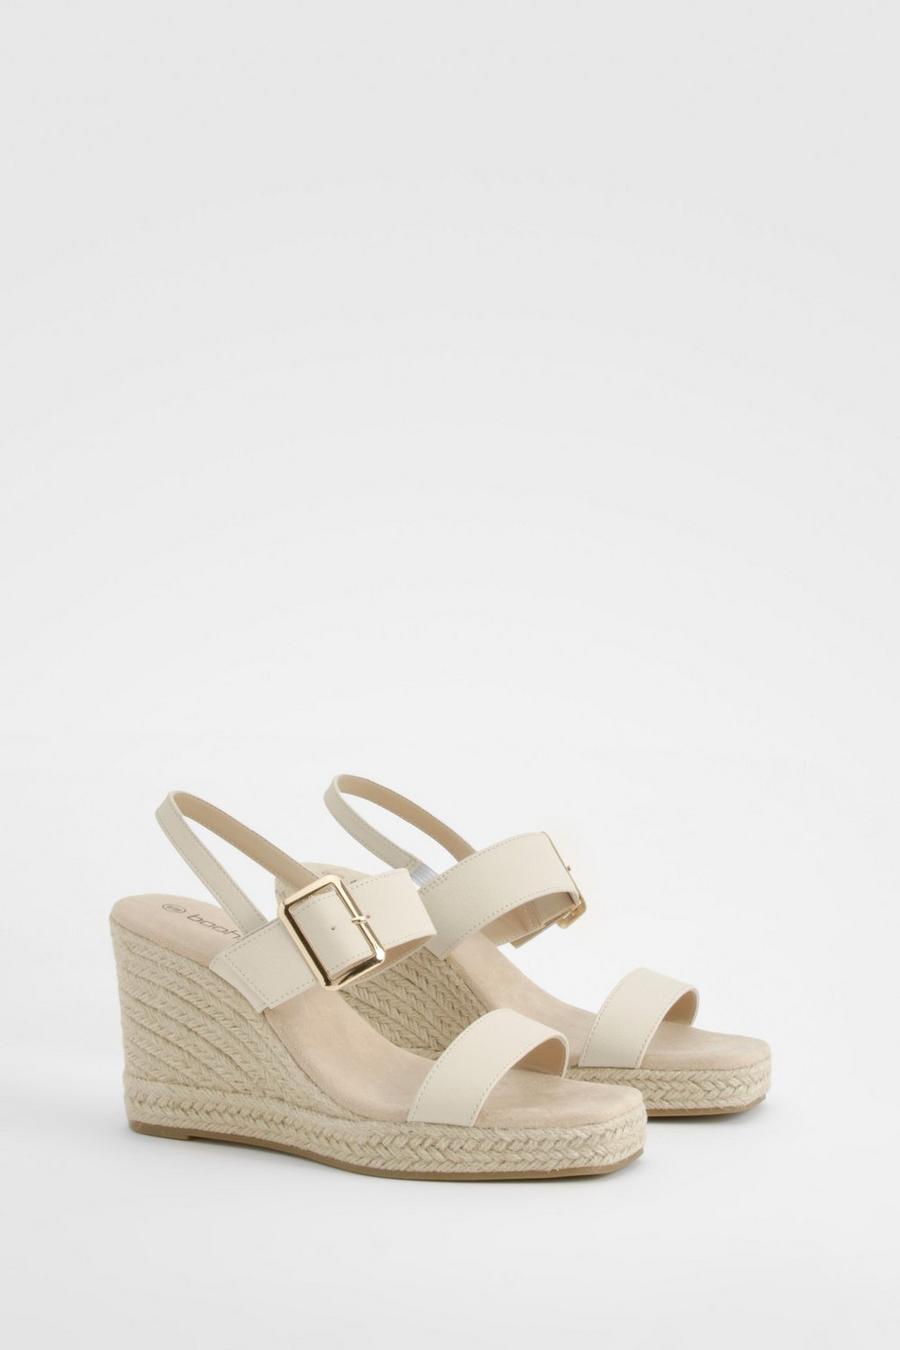 Cream Double Strap Buckle Detail Wedges 